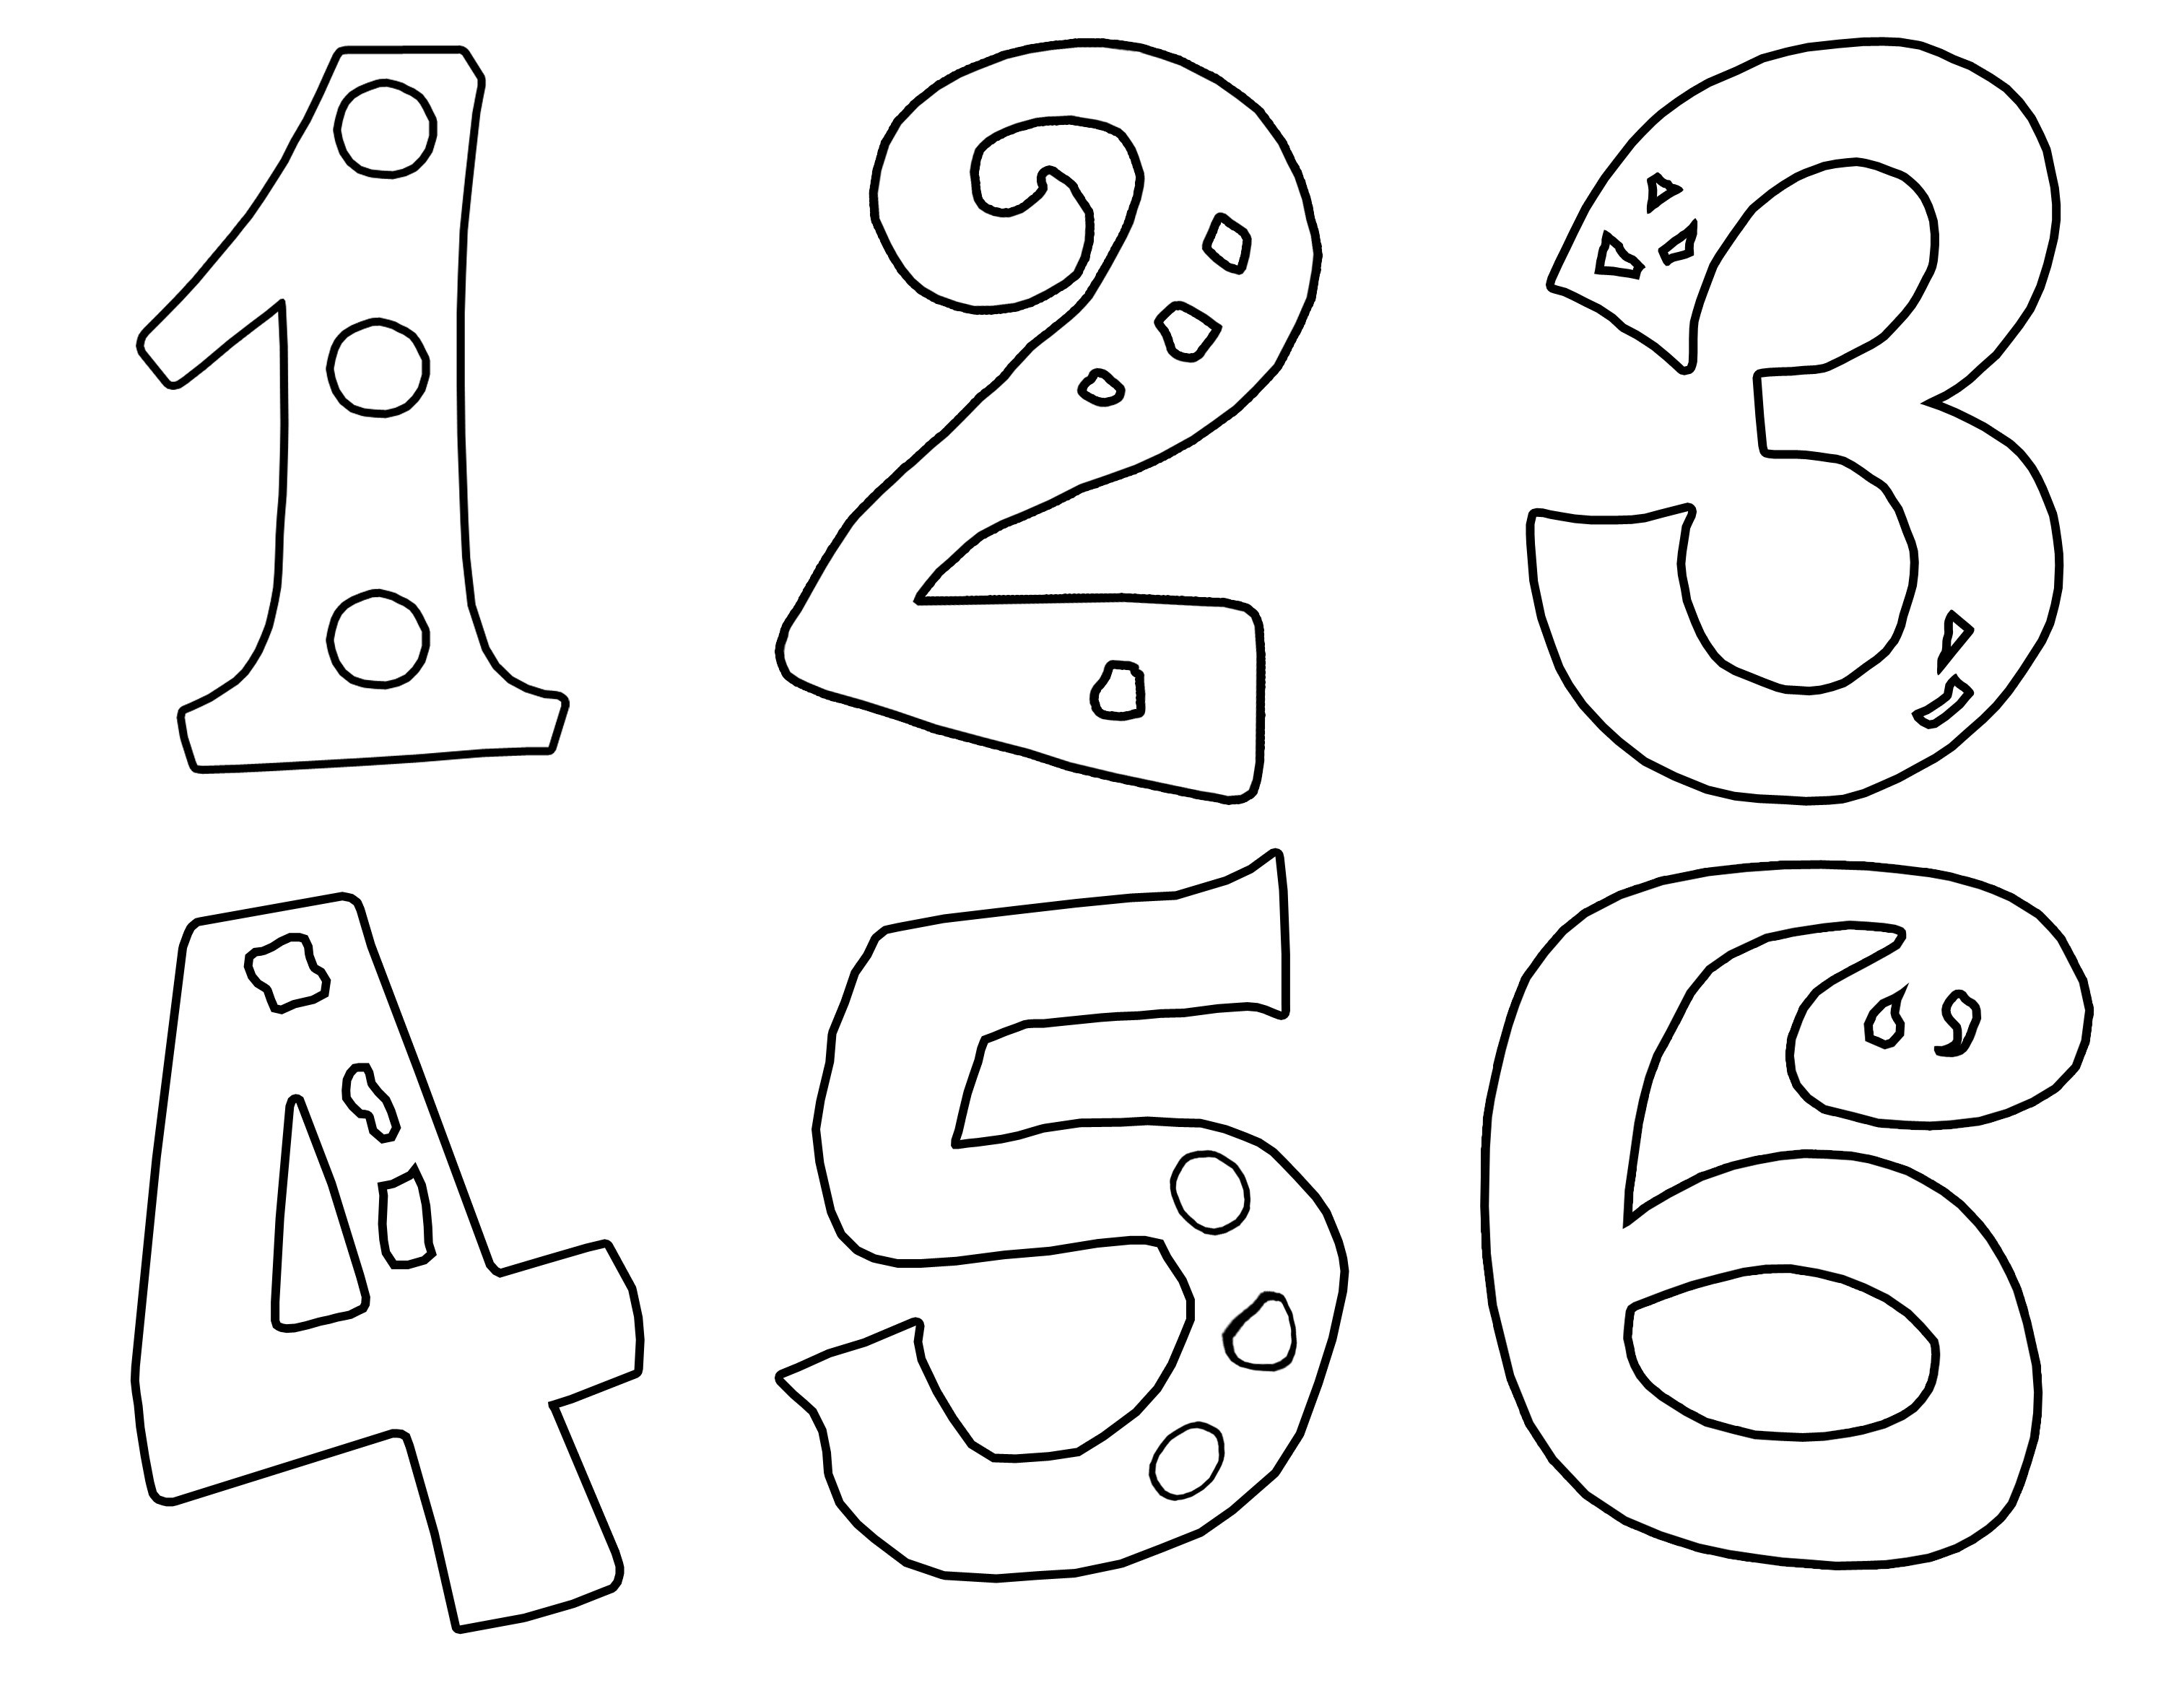 Coloring Pages With Numbers - Colette Cockrel